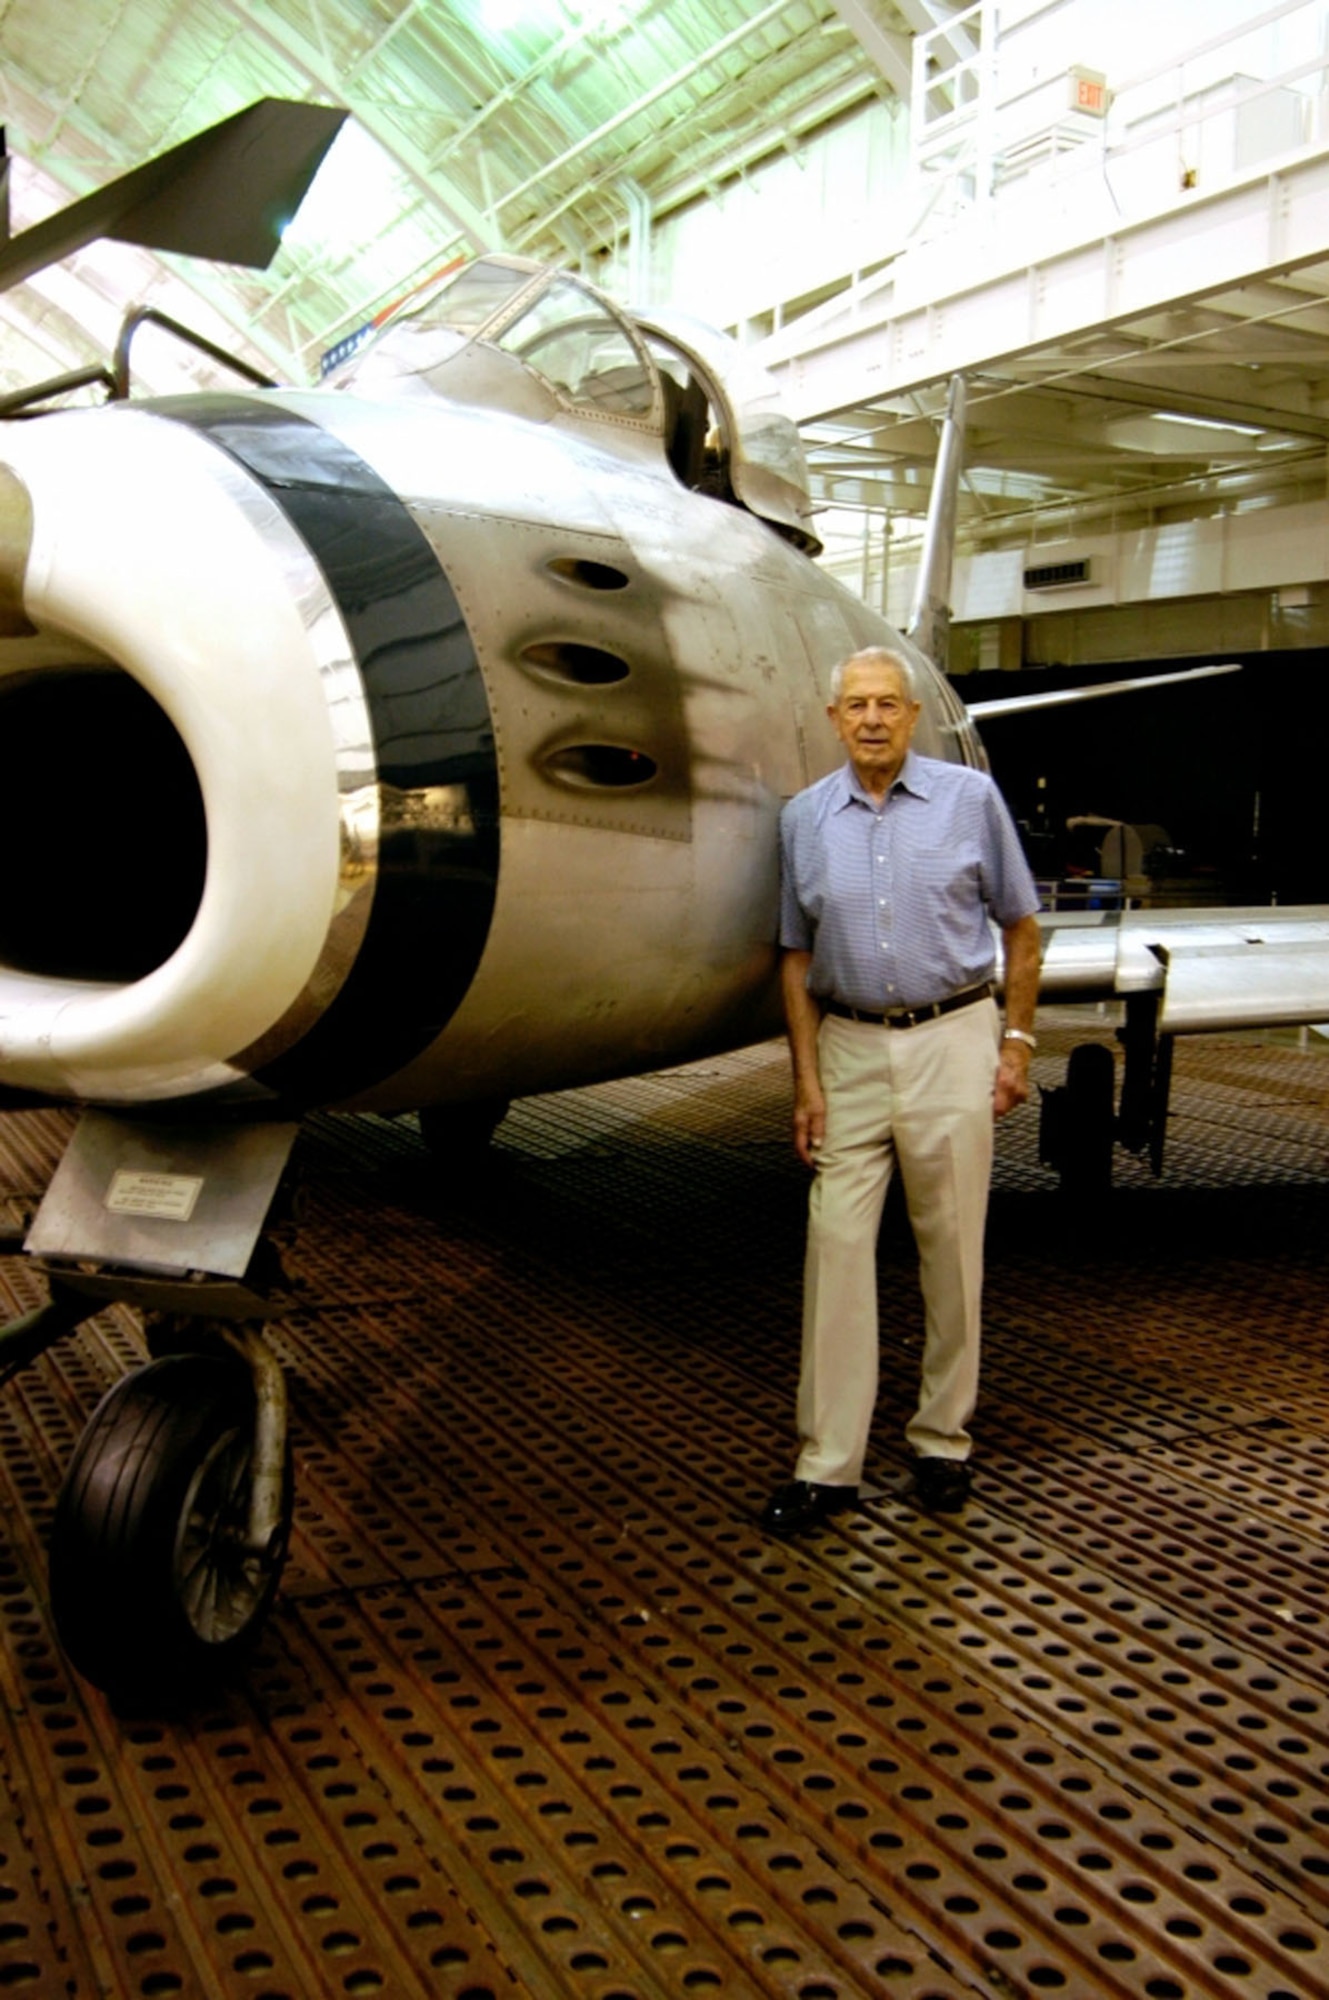 DAYTON, Ohio - Lt. Col. Bruce Hinton stands beside the North American F-86A Sabre in the Korean War Gallery at the National Museum of the U.S. Air Force. The museum's F-86 is is marked as the 4th Fighter Group F-86A flown by Lt. Col. Bruce Hinton on Dec. 17, 1950, when he became the first F-86 pilot to shoot down a MiG. (U.S. Air Force photo)